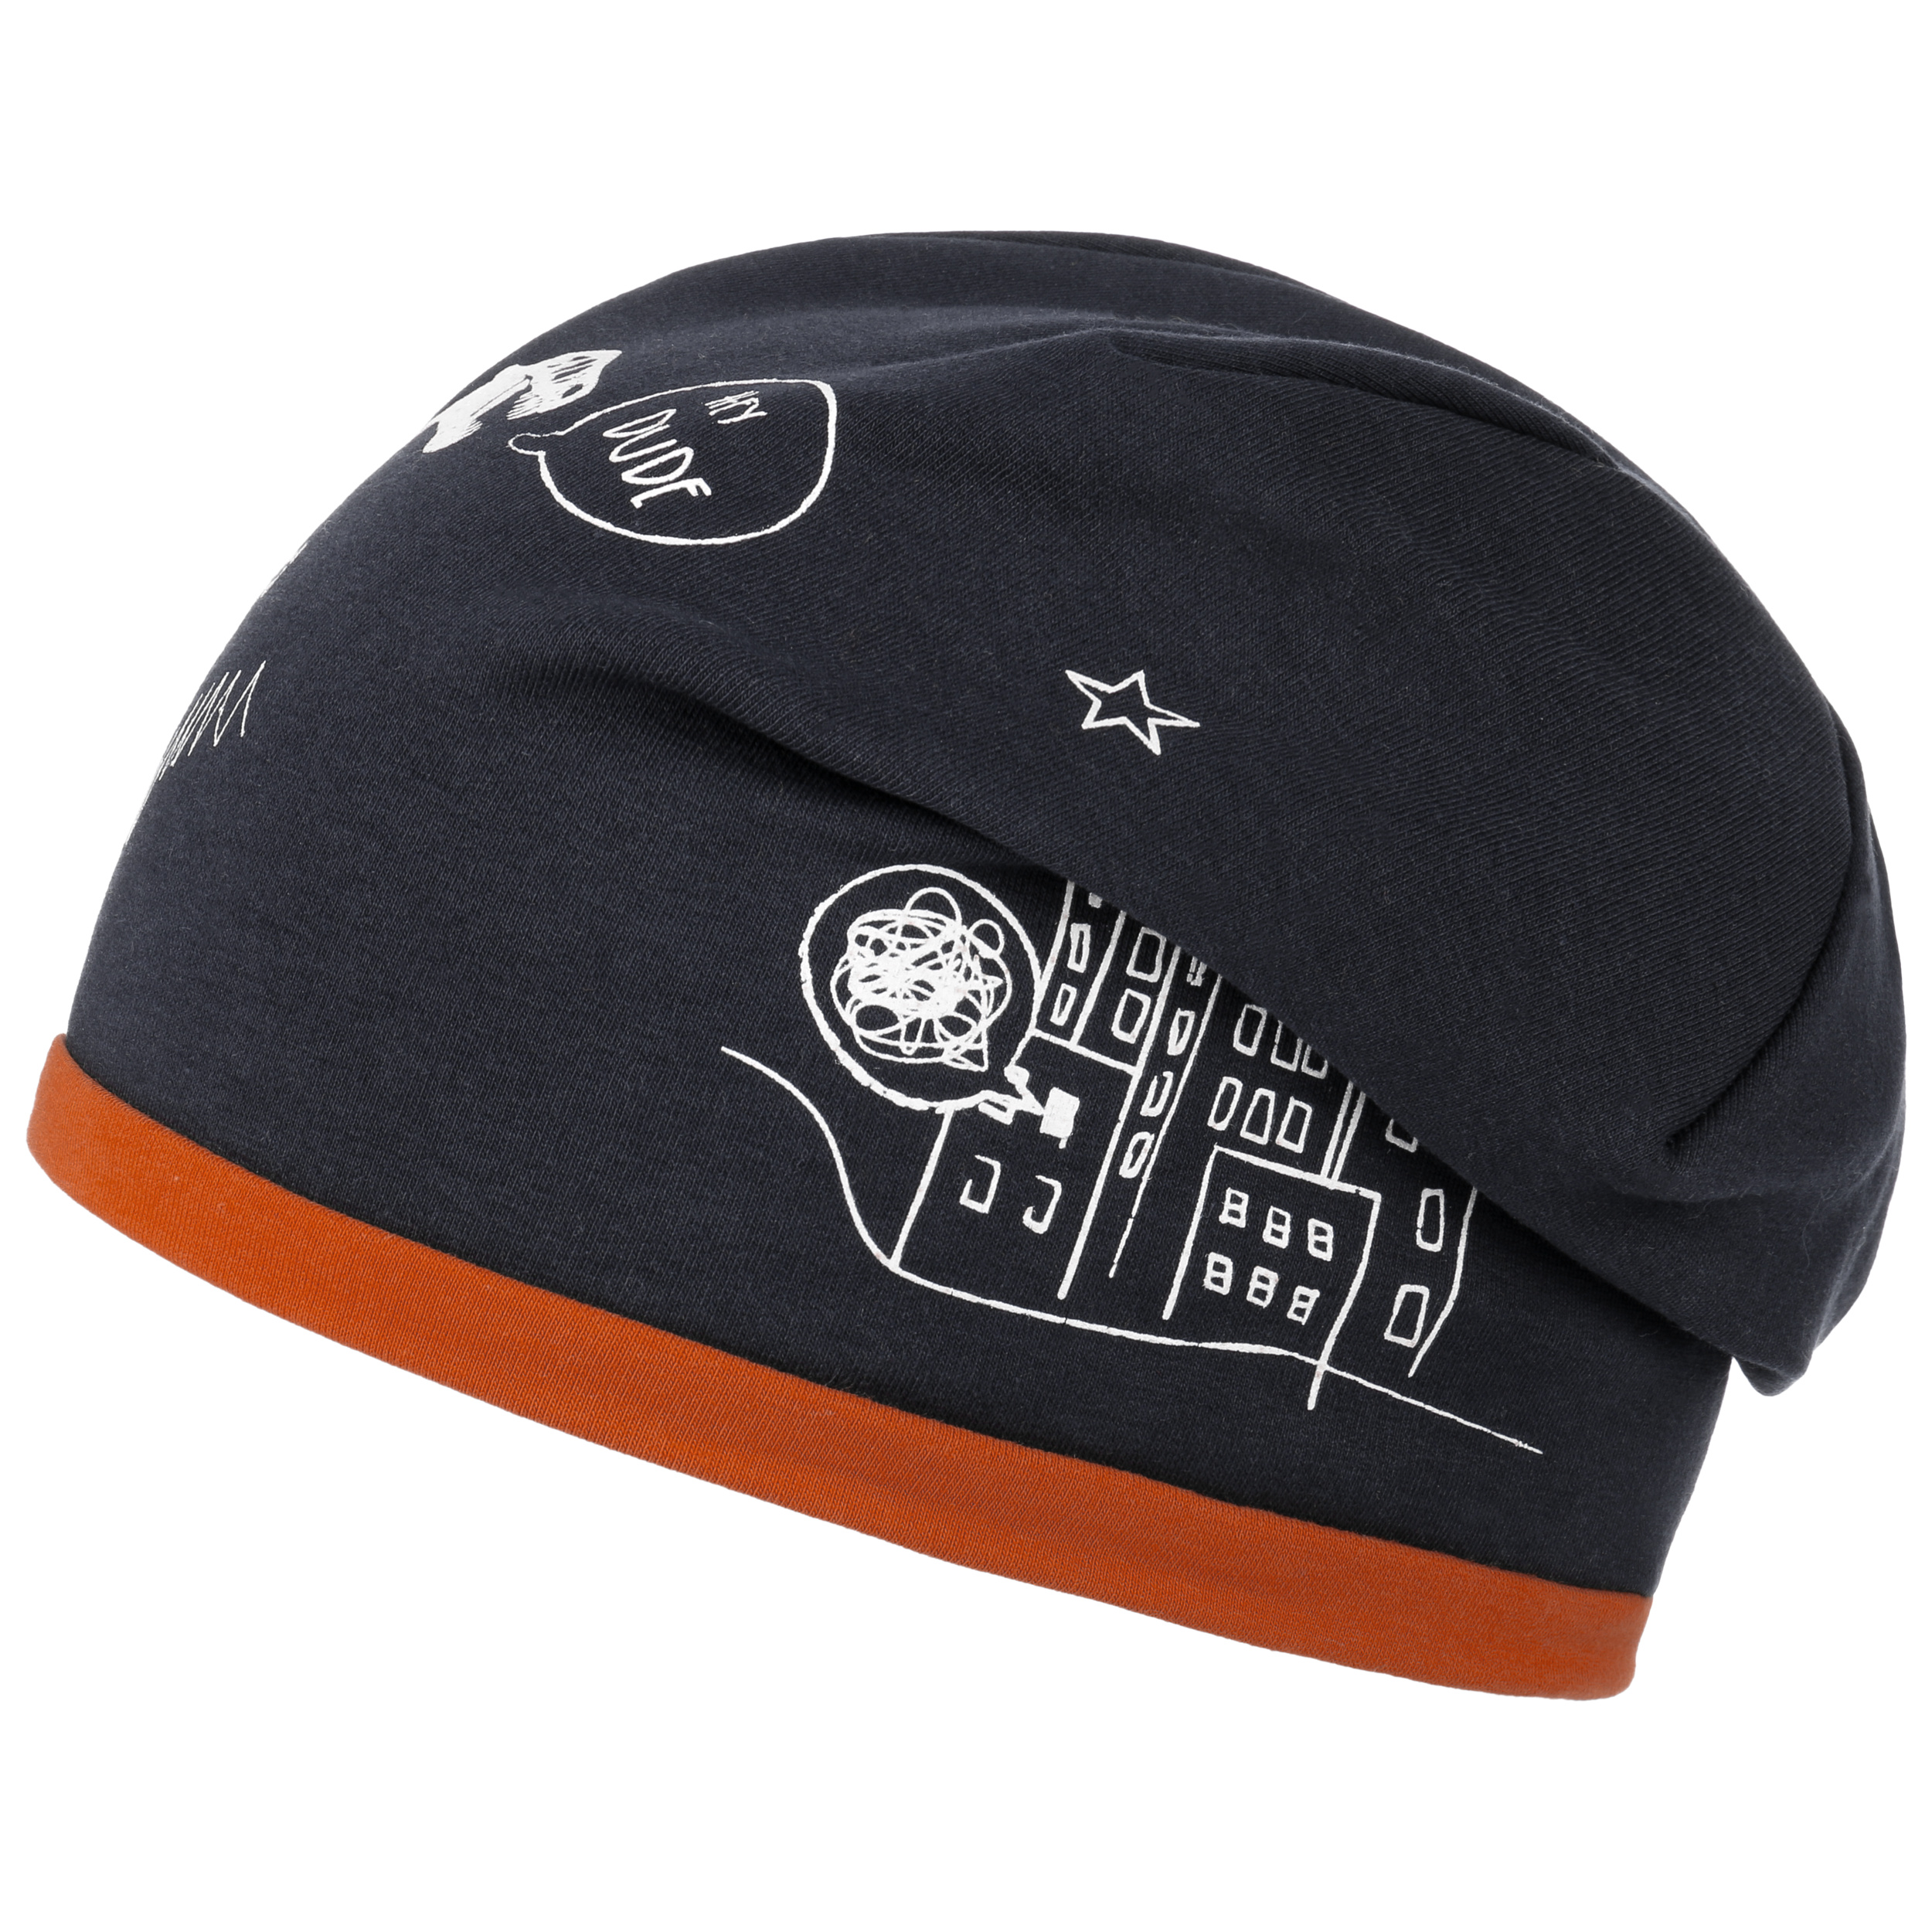 Hats & Patches Black - Glow